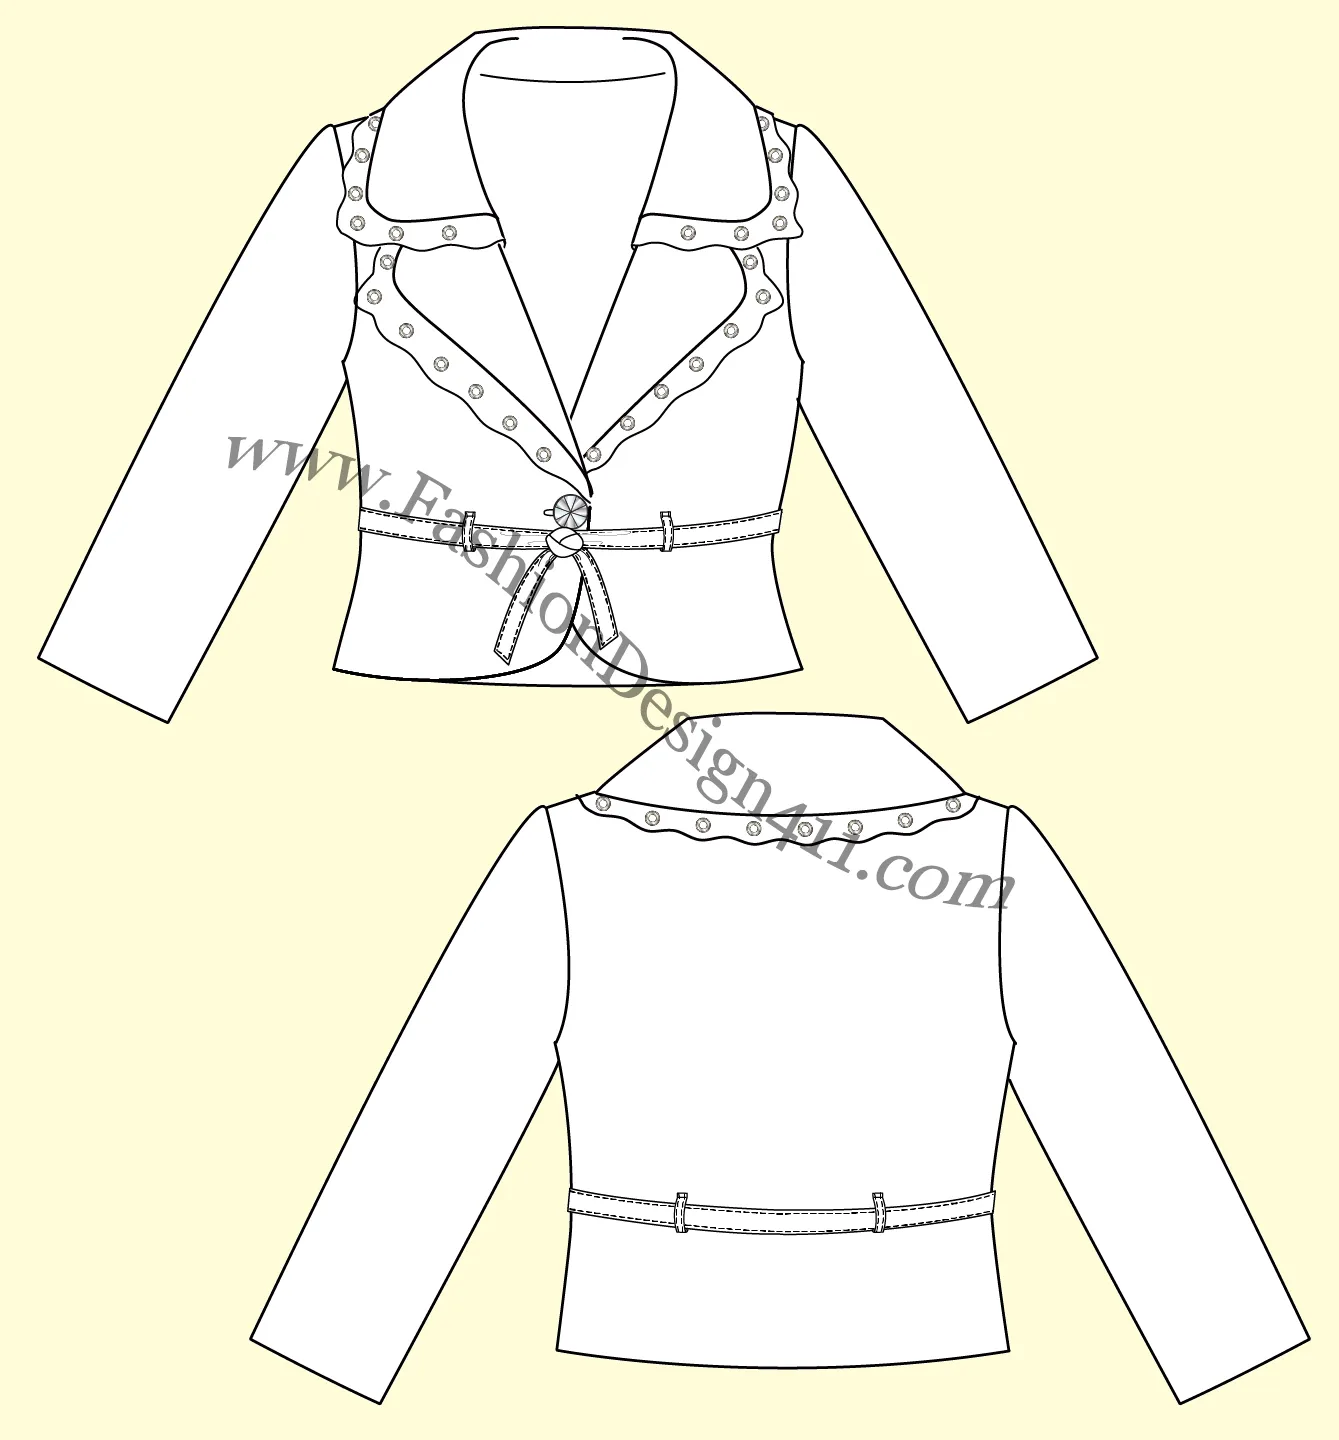 030 fashion flat sketch of a women's, cropped, belted blazer with trim at lapels and collar